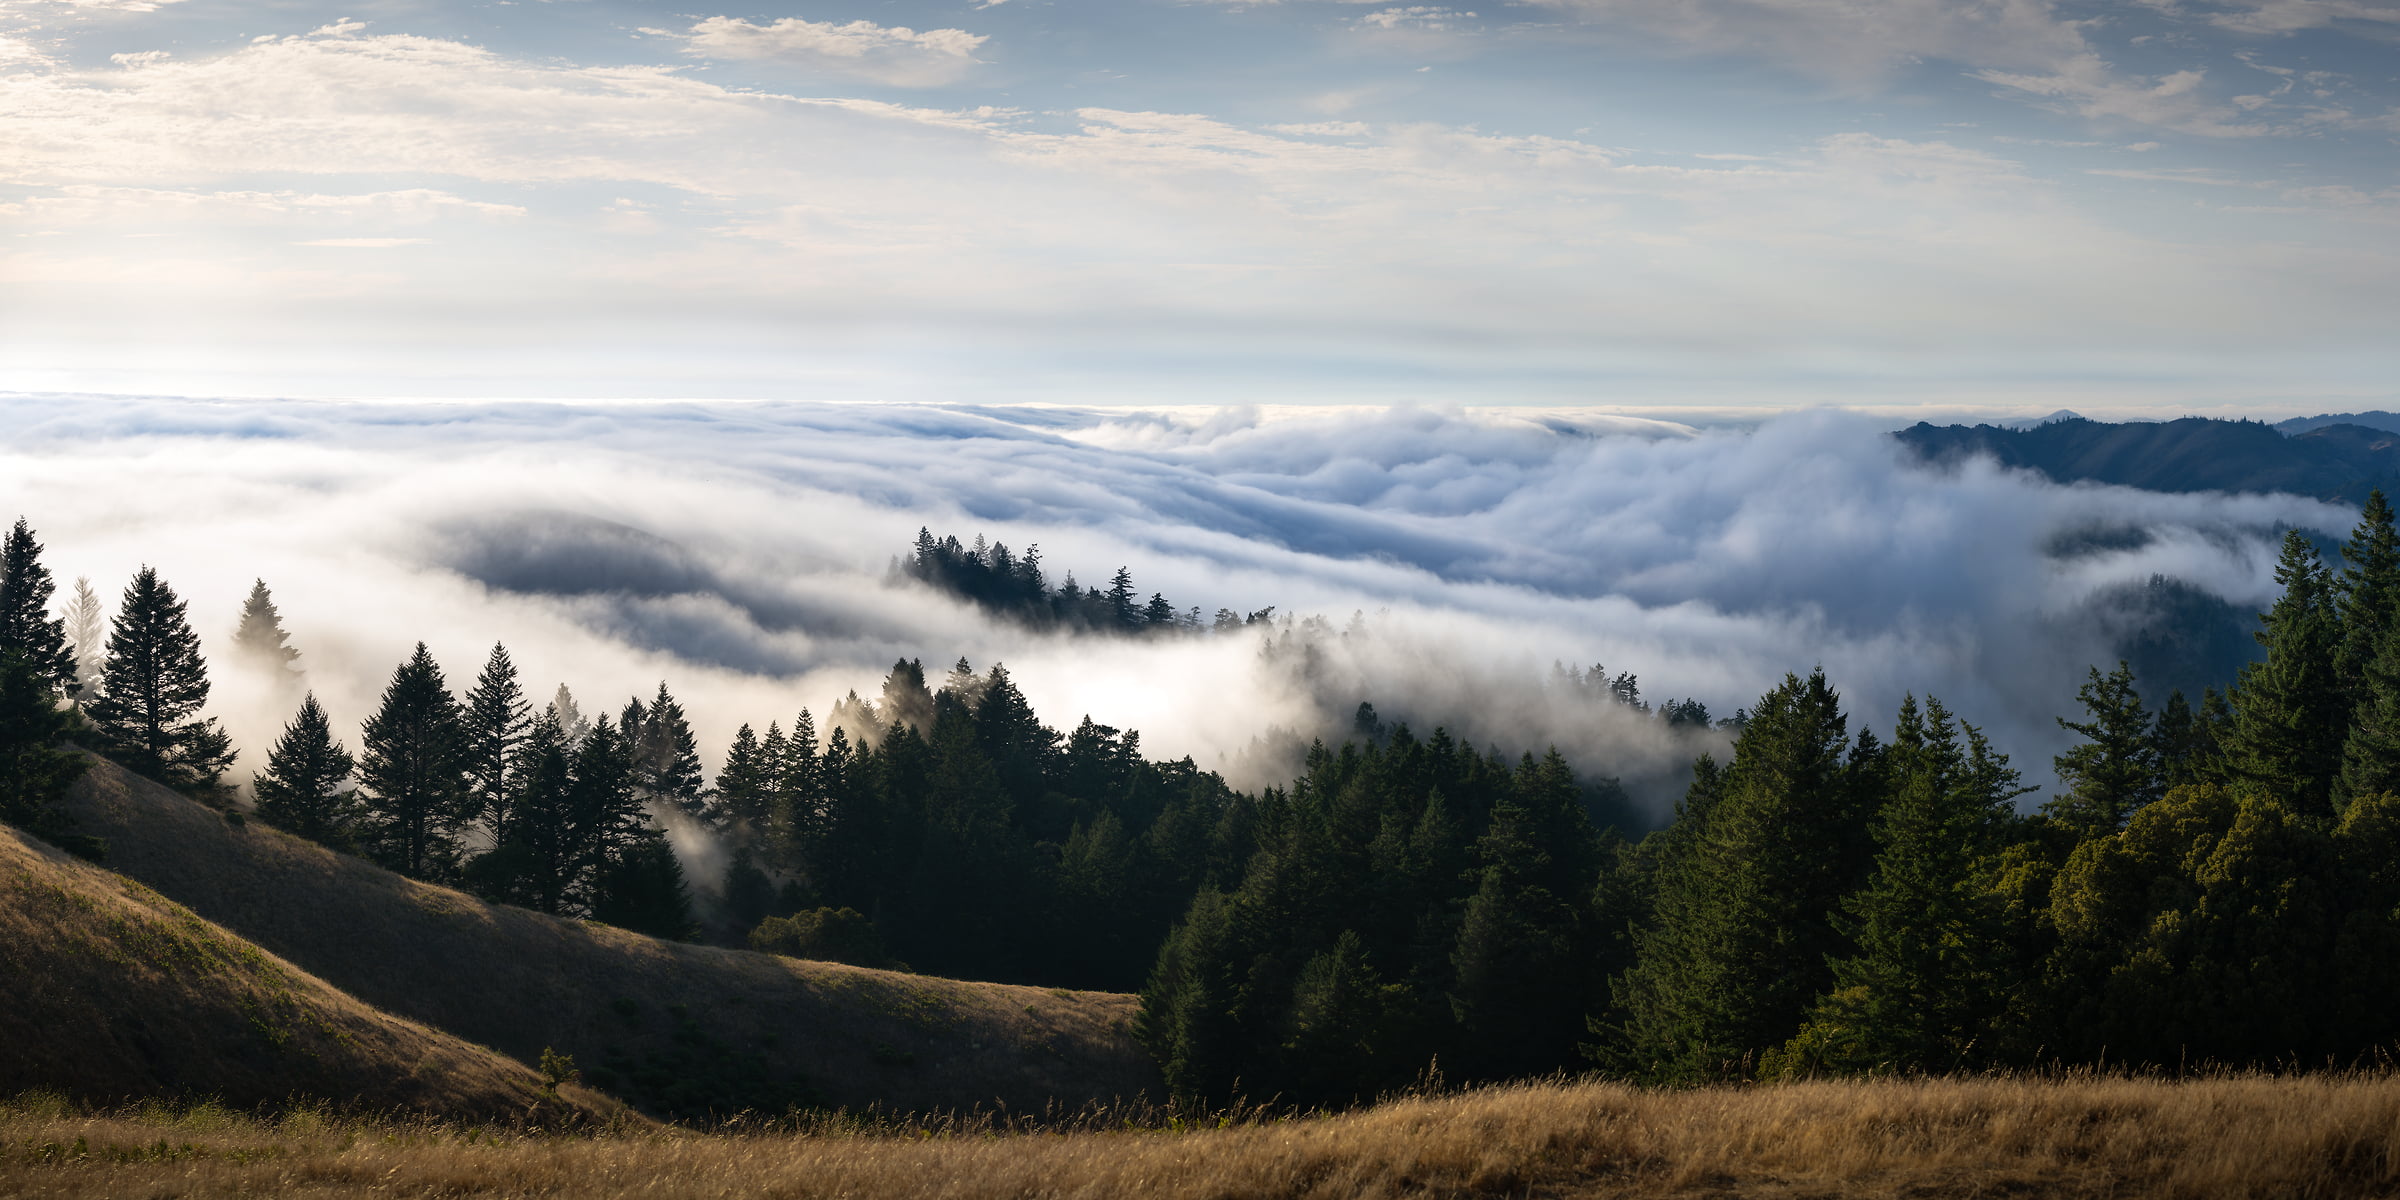 374 megapixels! A very high resolution, large-format VAST photo print of fog on a hillside amid trees; landscape photograph created by Jeff Lewis in Mt. Tamalpais, California